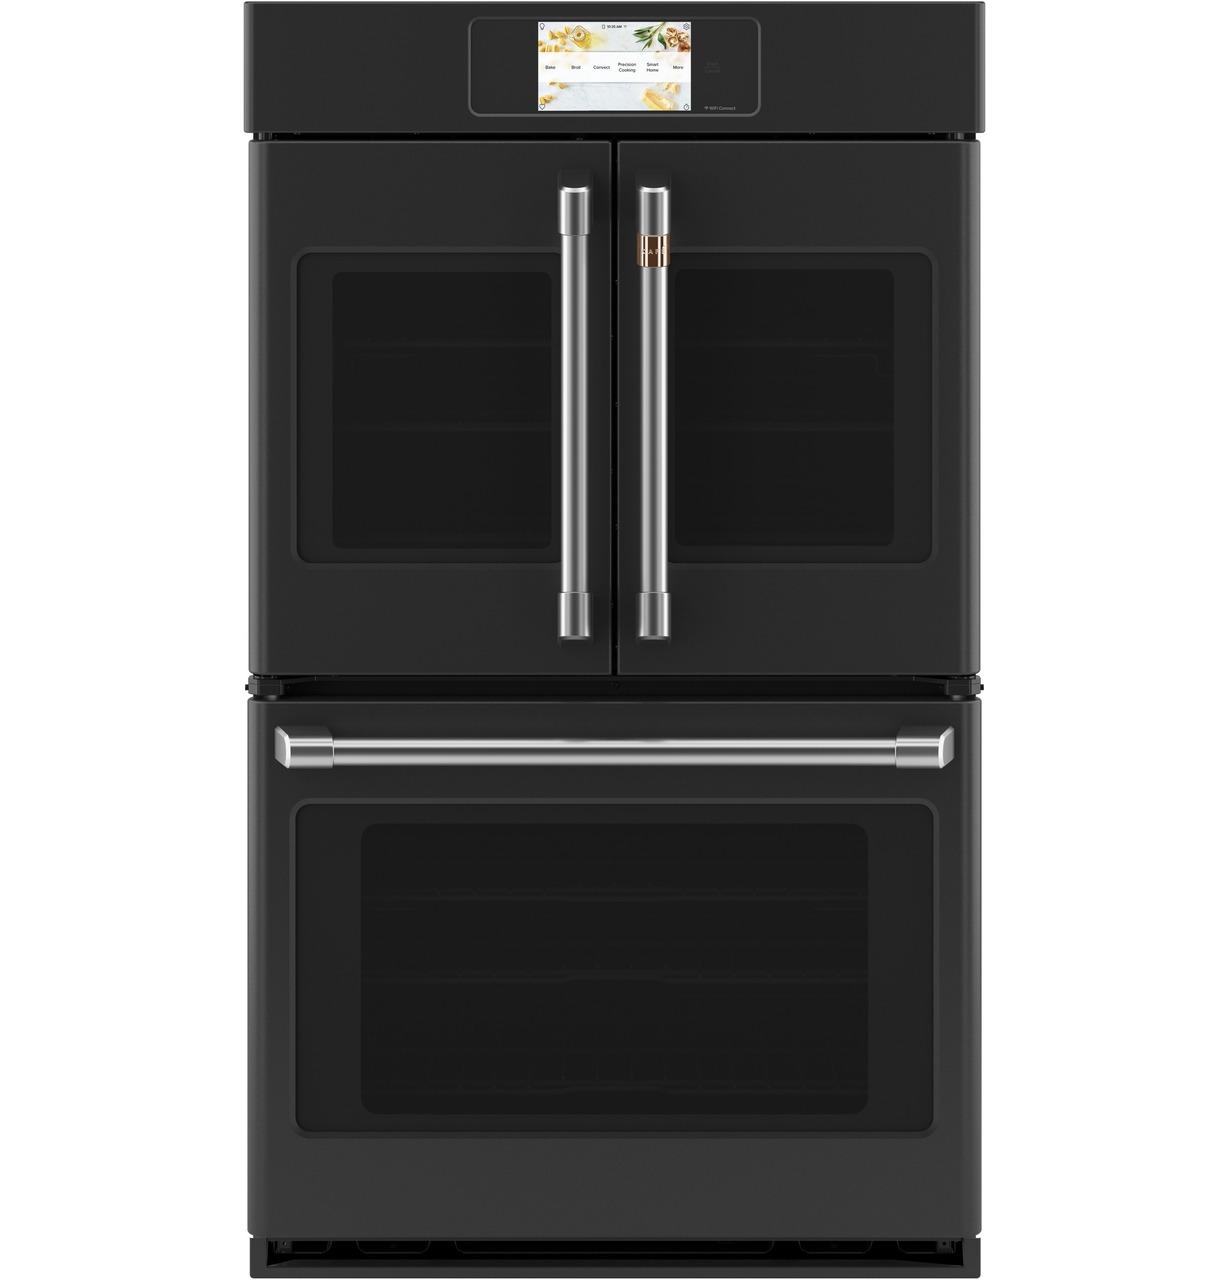 Cafe Caf(eback)™ Professional Series 30" Smart Built-In Convection French-Door Double Wall Oven